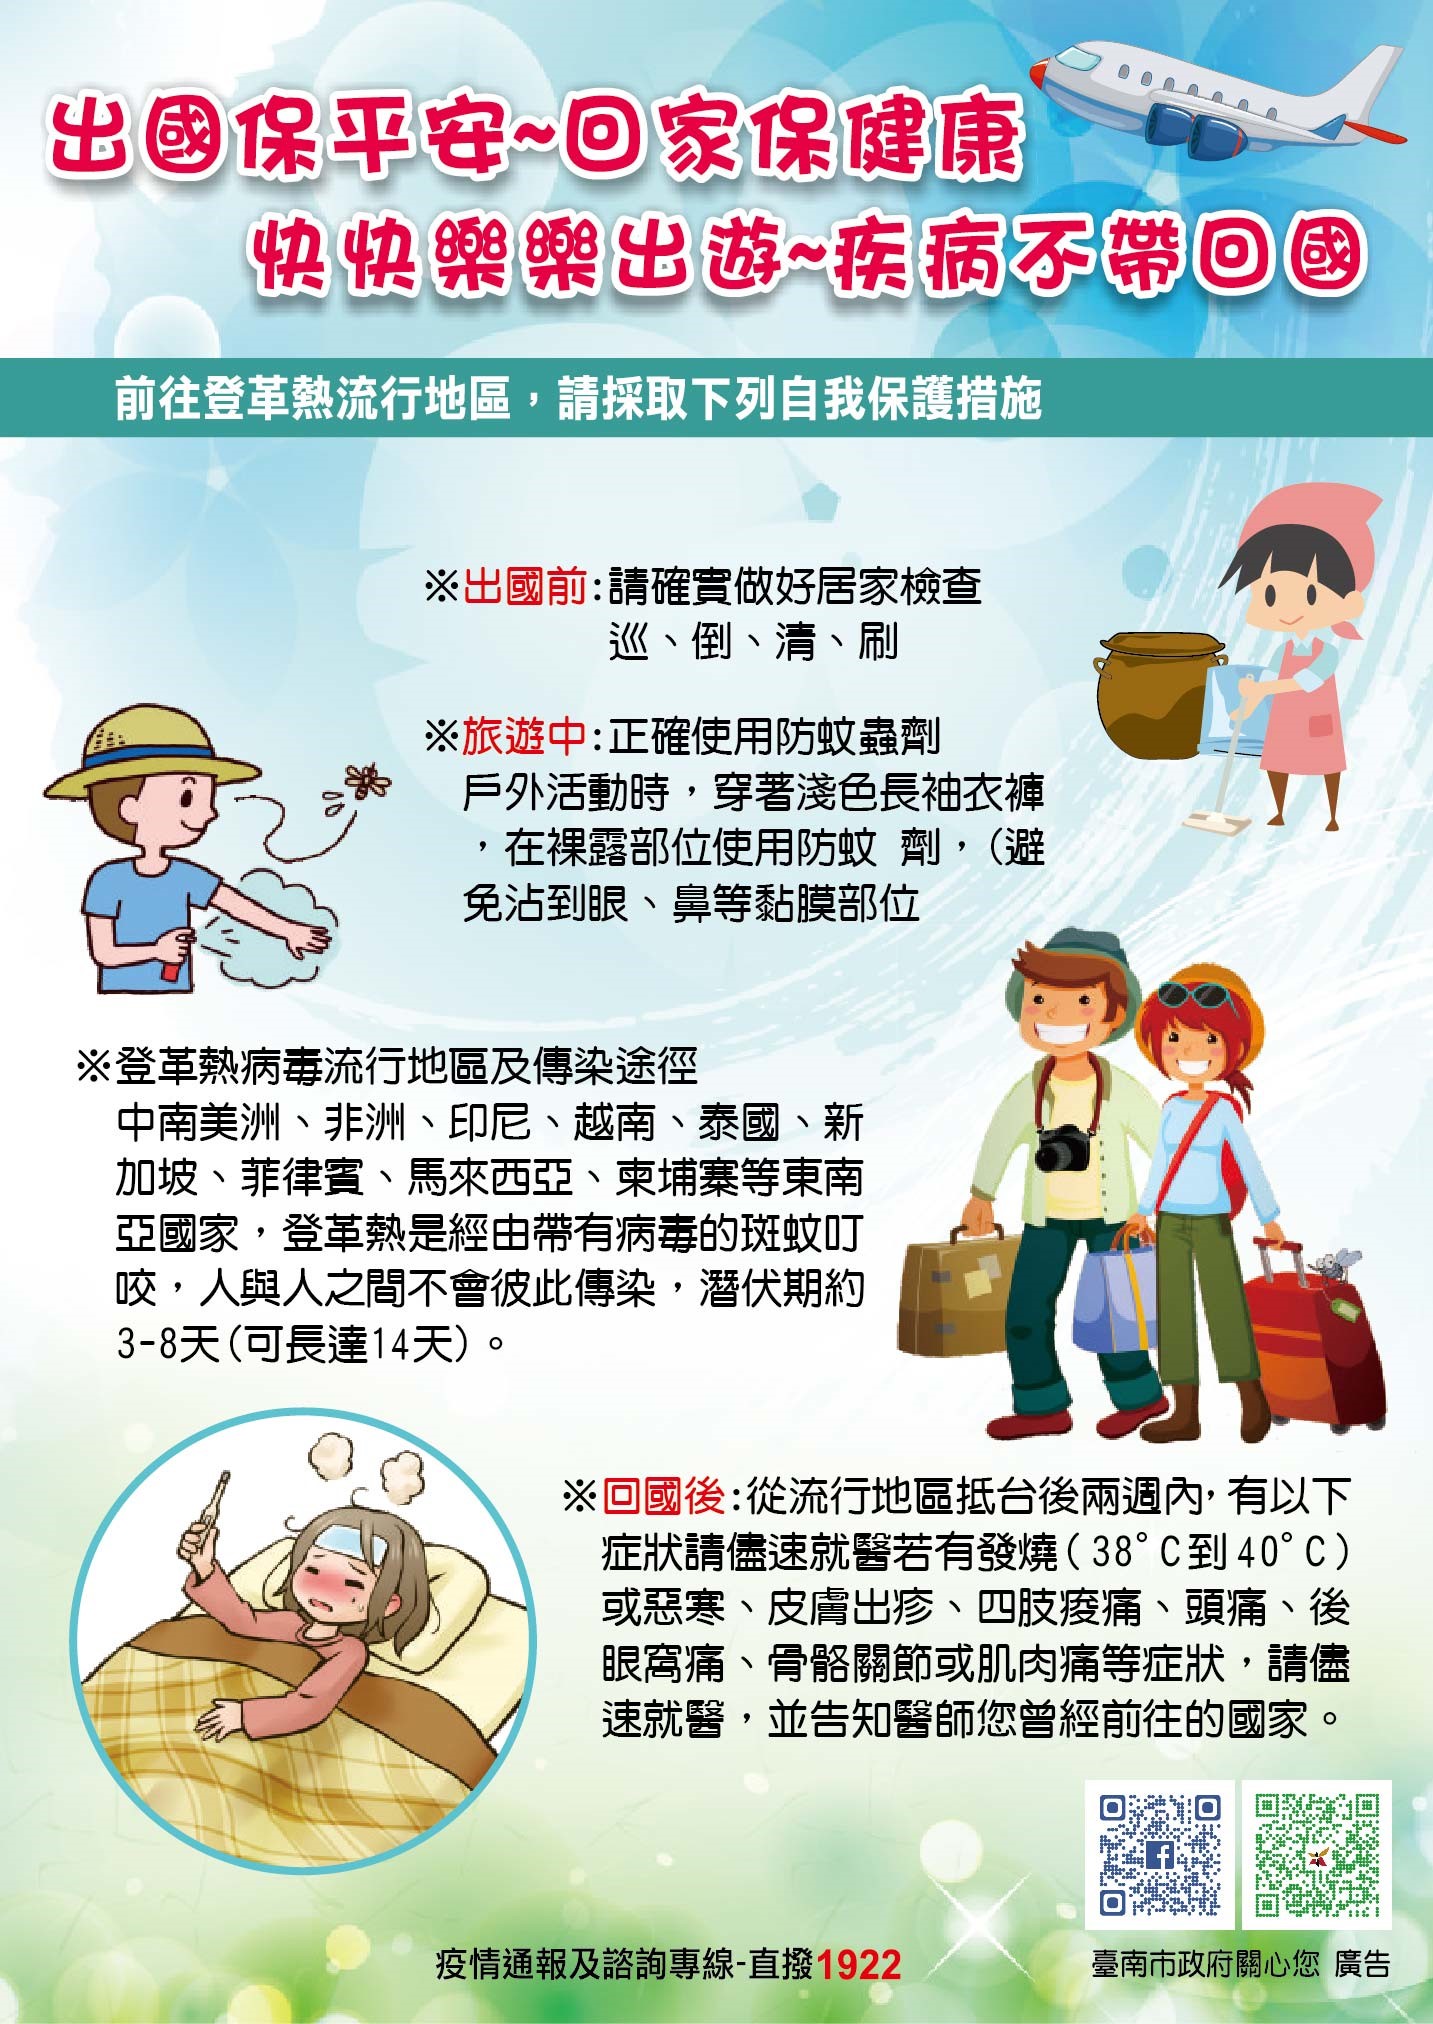 Tainan City Gives Containment for Health Packages to New Immigrants Visiting Their Home Countries.